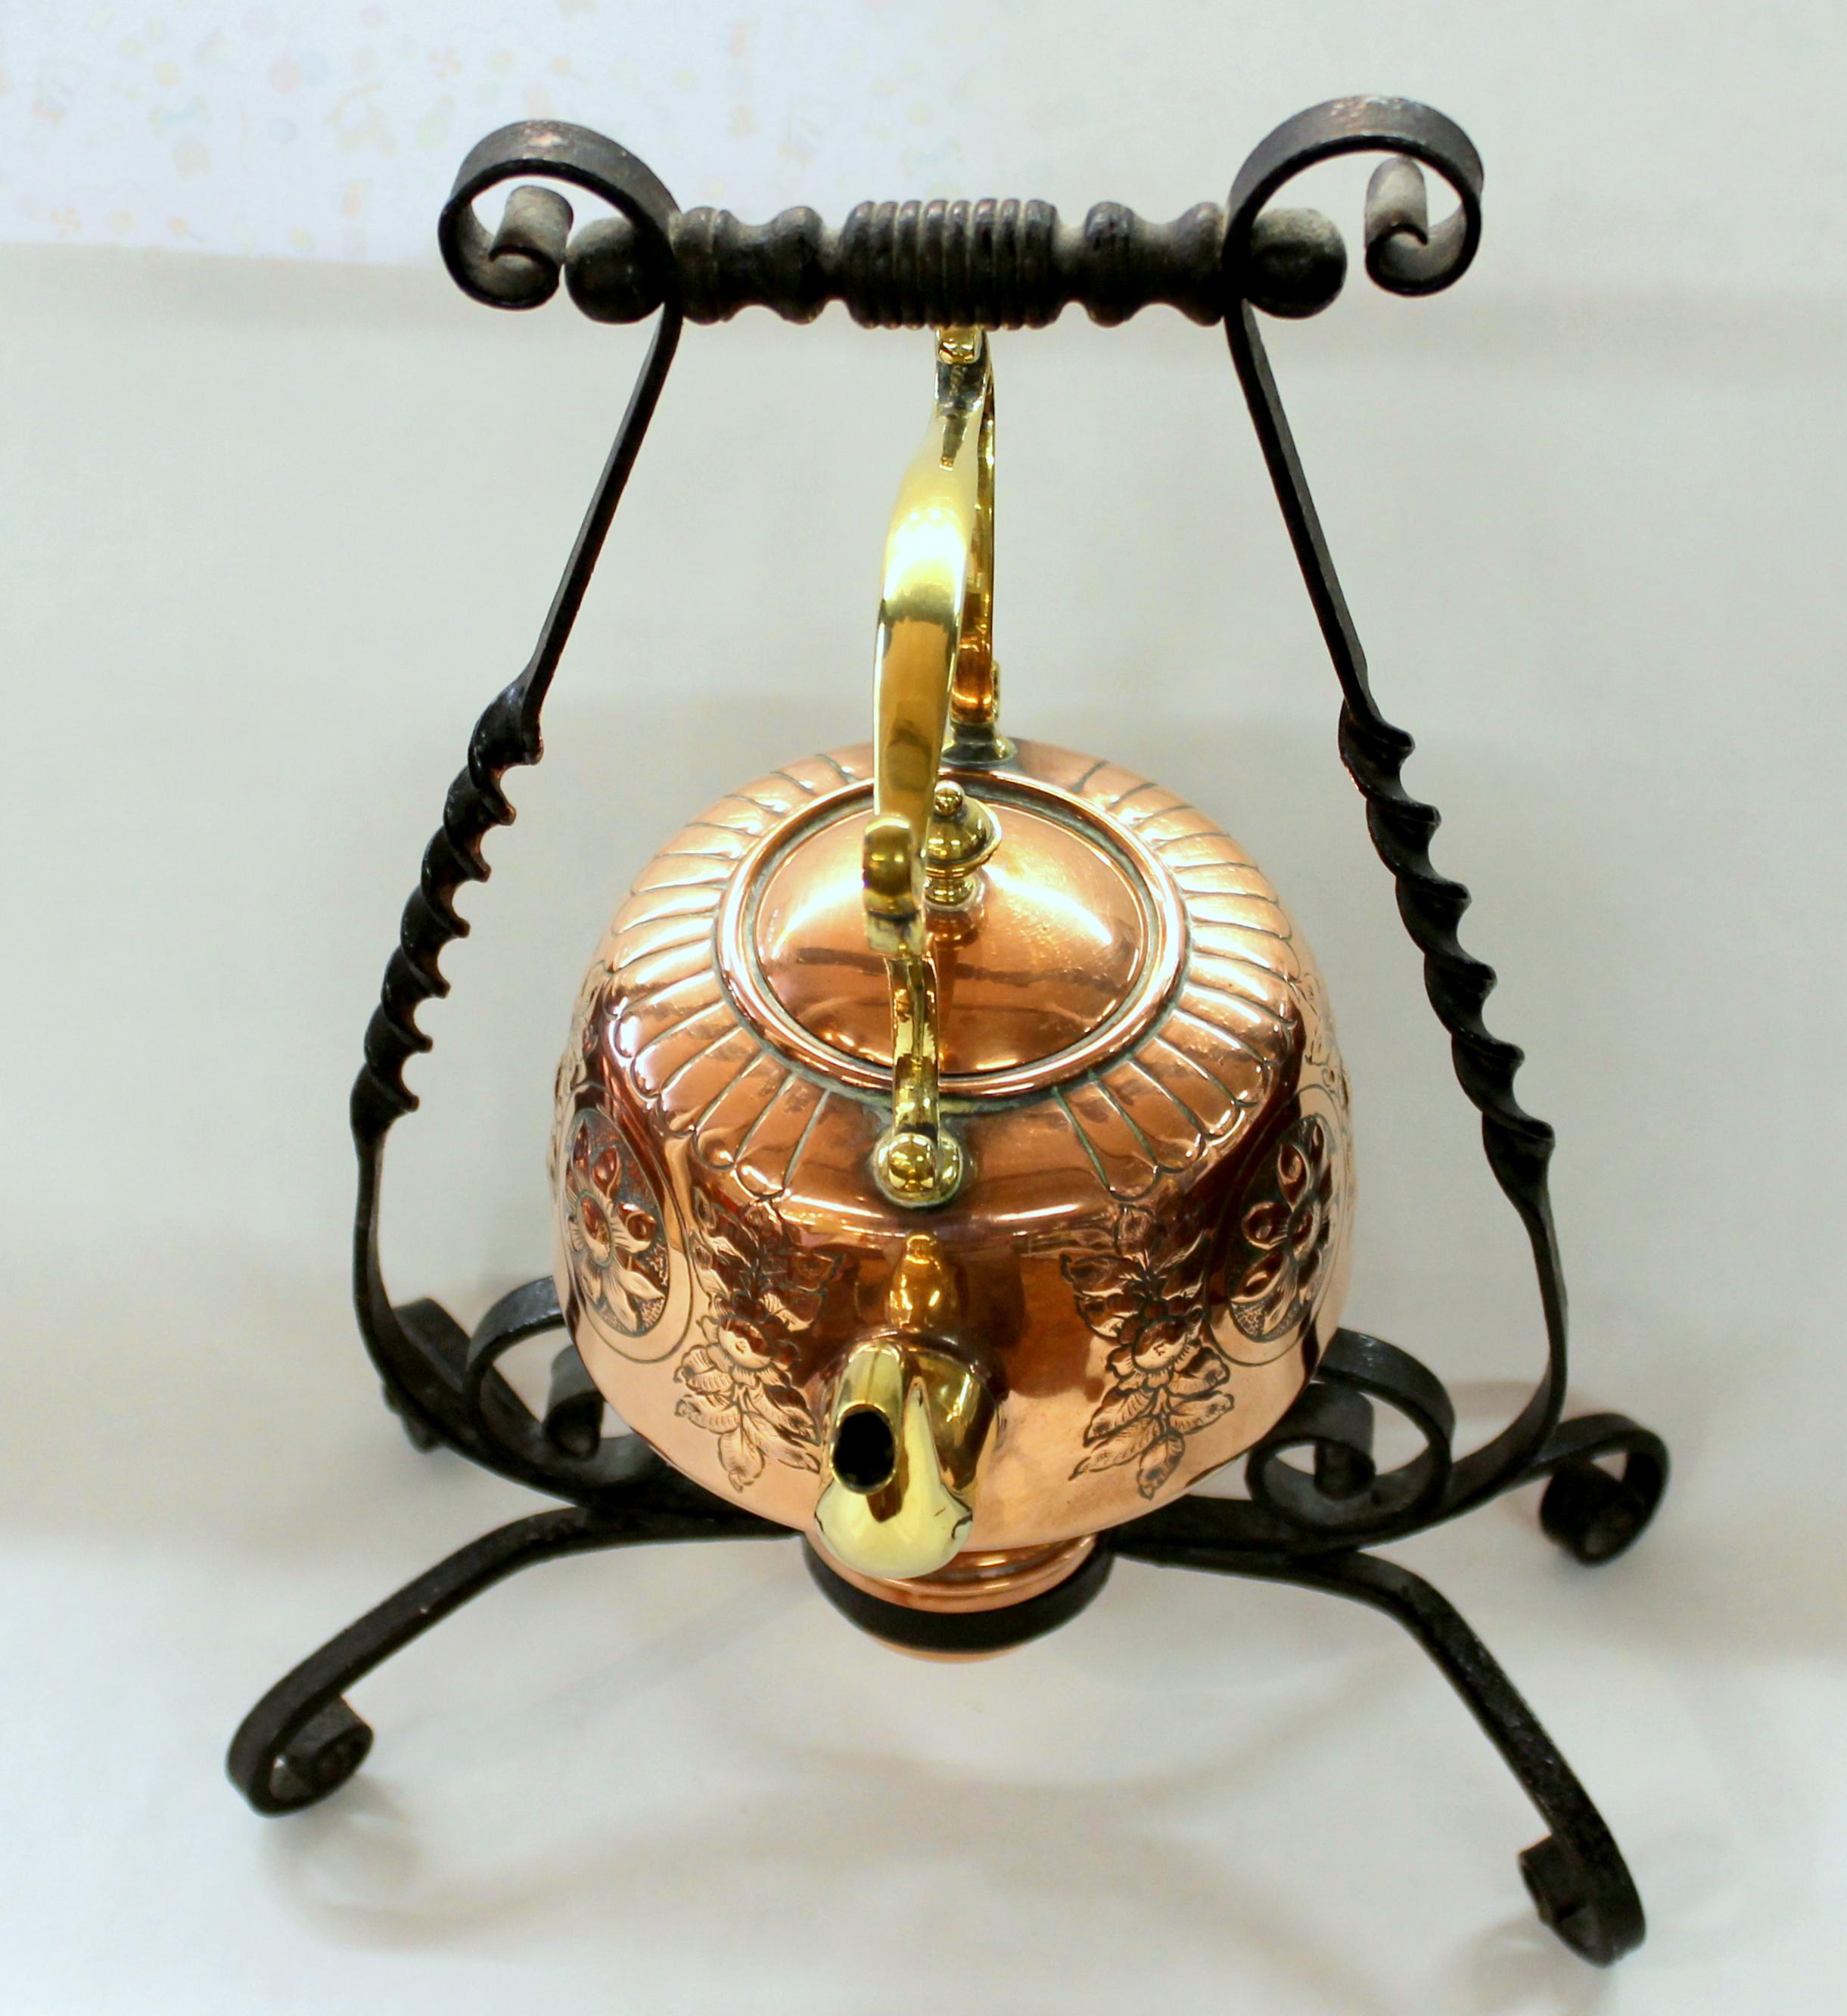 Fine and rare antique English hand chased copper and brass kettle on original wrought iron stand with original copper burner.

Please note lovely handwrought iron stand and beautifully hand chased original copper kettle and burner.